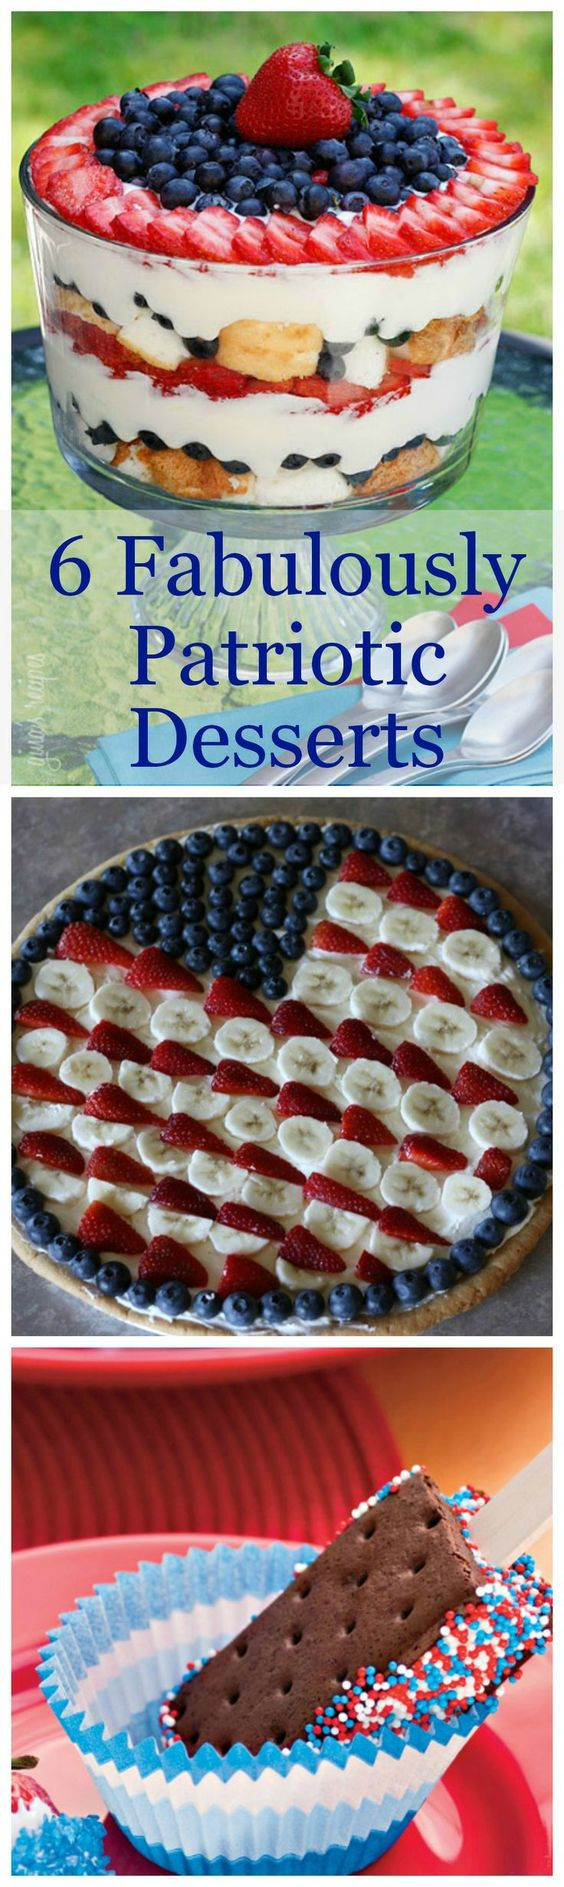 4Th Of July Desserts Pinterest
 4th of july desserts Summer and July 4th on Pinterest